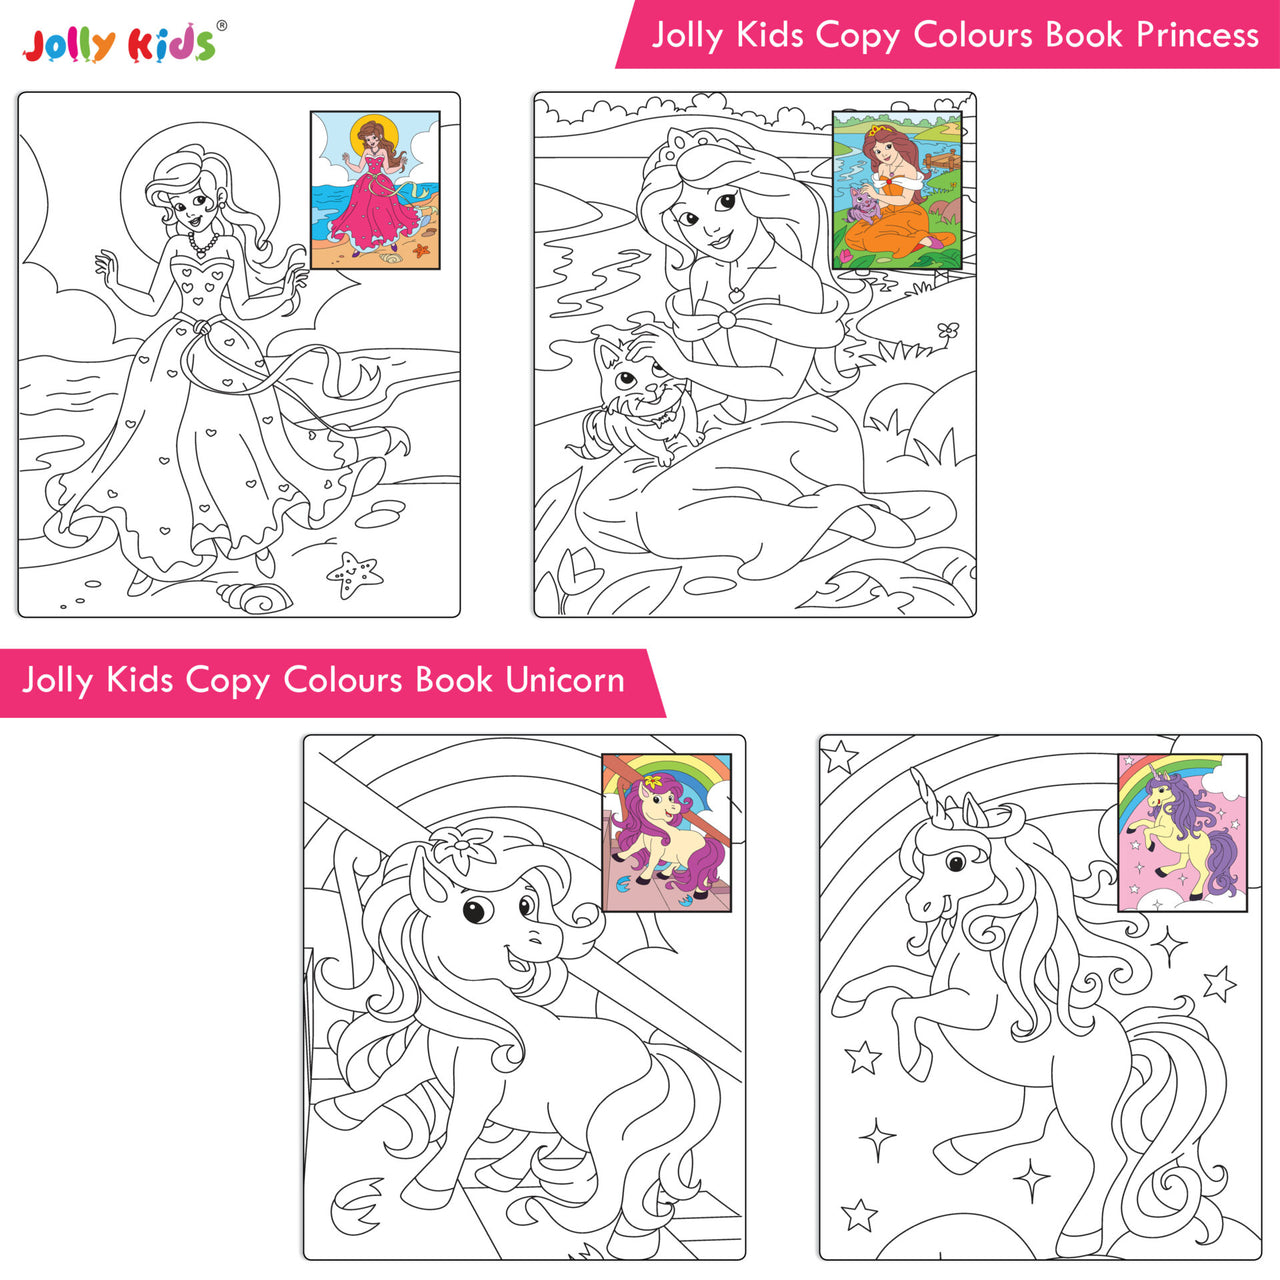 Jolly Kids Big Copy Colour Books Set of 8| Colouring Theme Animals, Flowers, Dinosaurs, Mermaid, Ocean, Pirates, Princess & Unicorn Ages 3-10 Years - Distacart